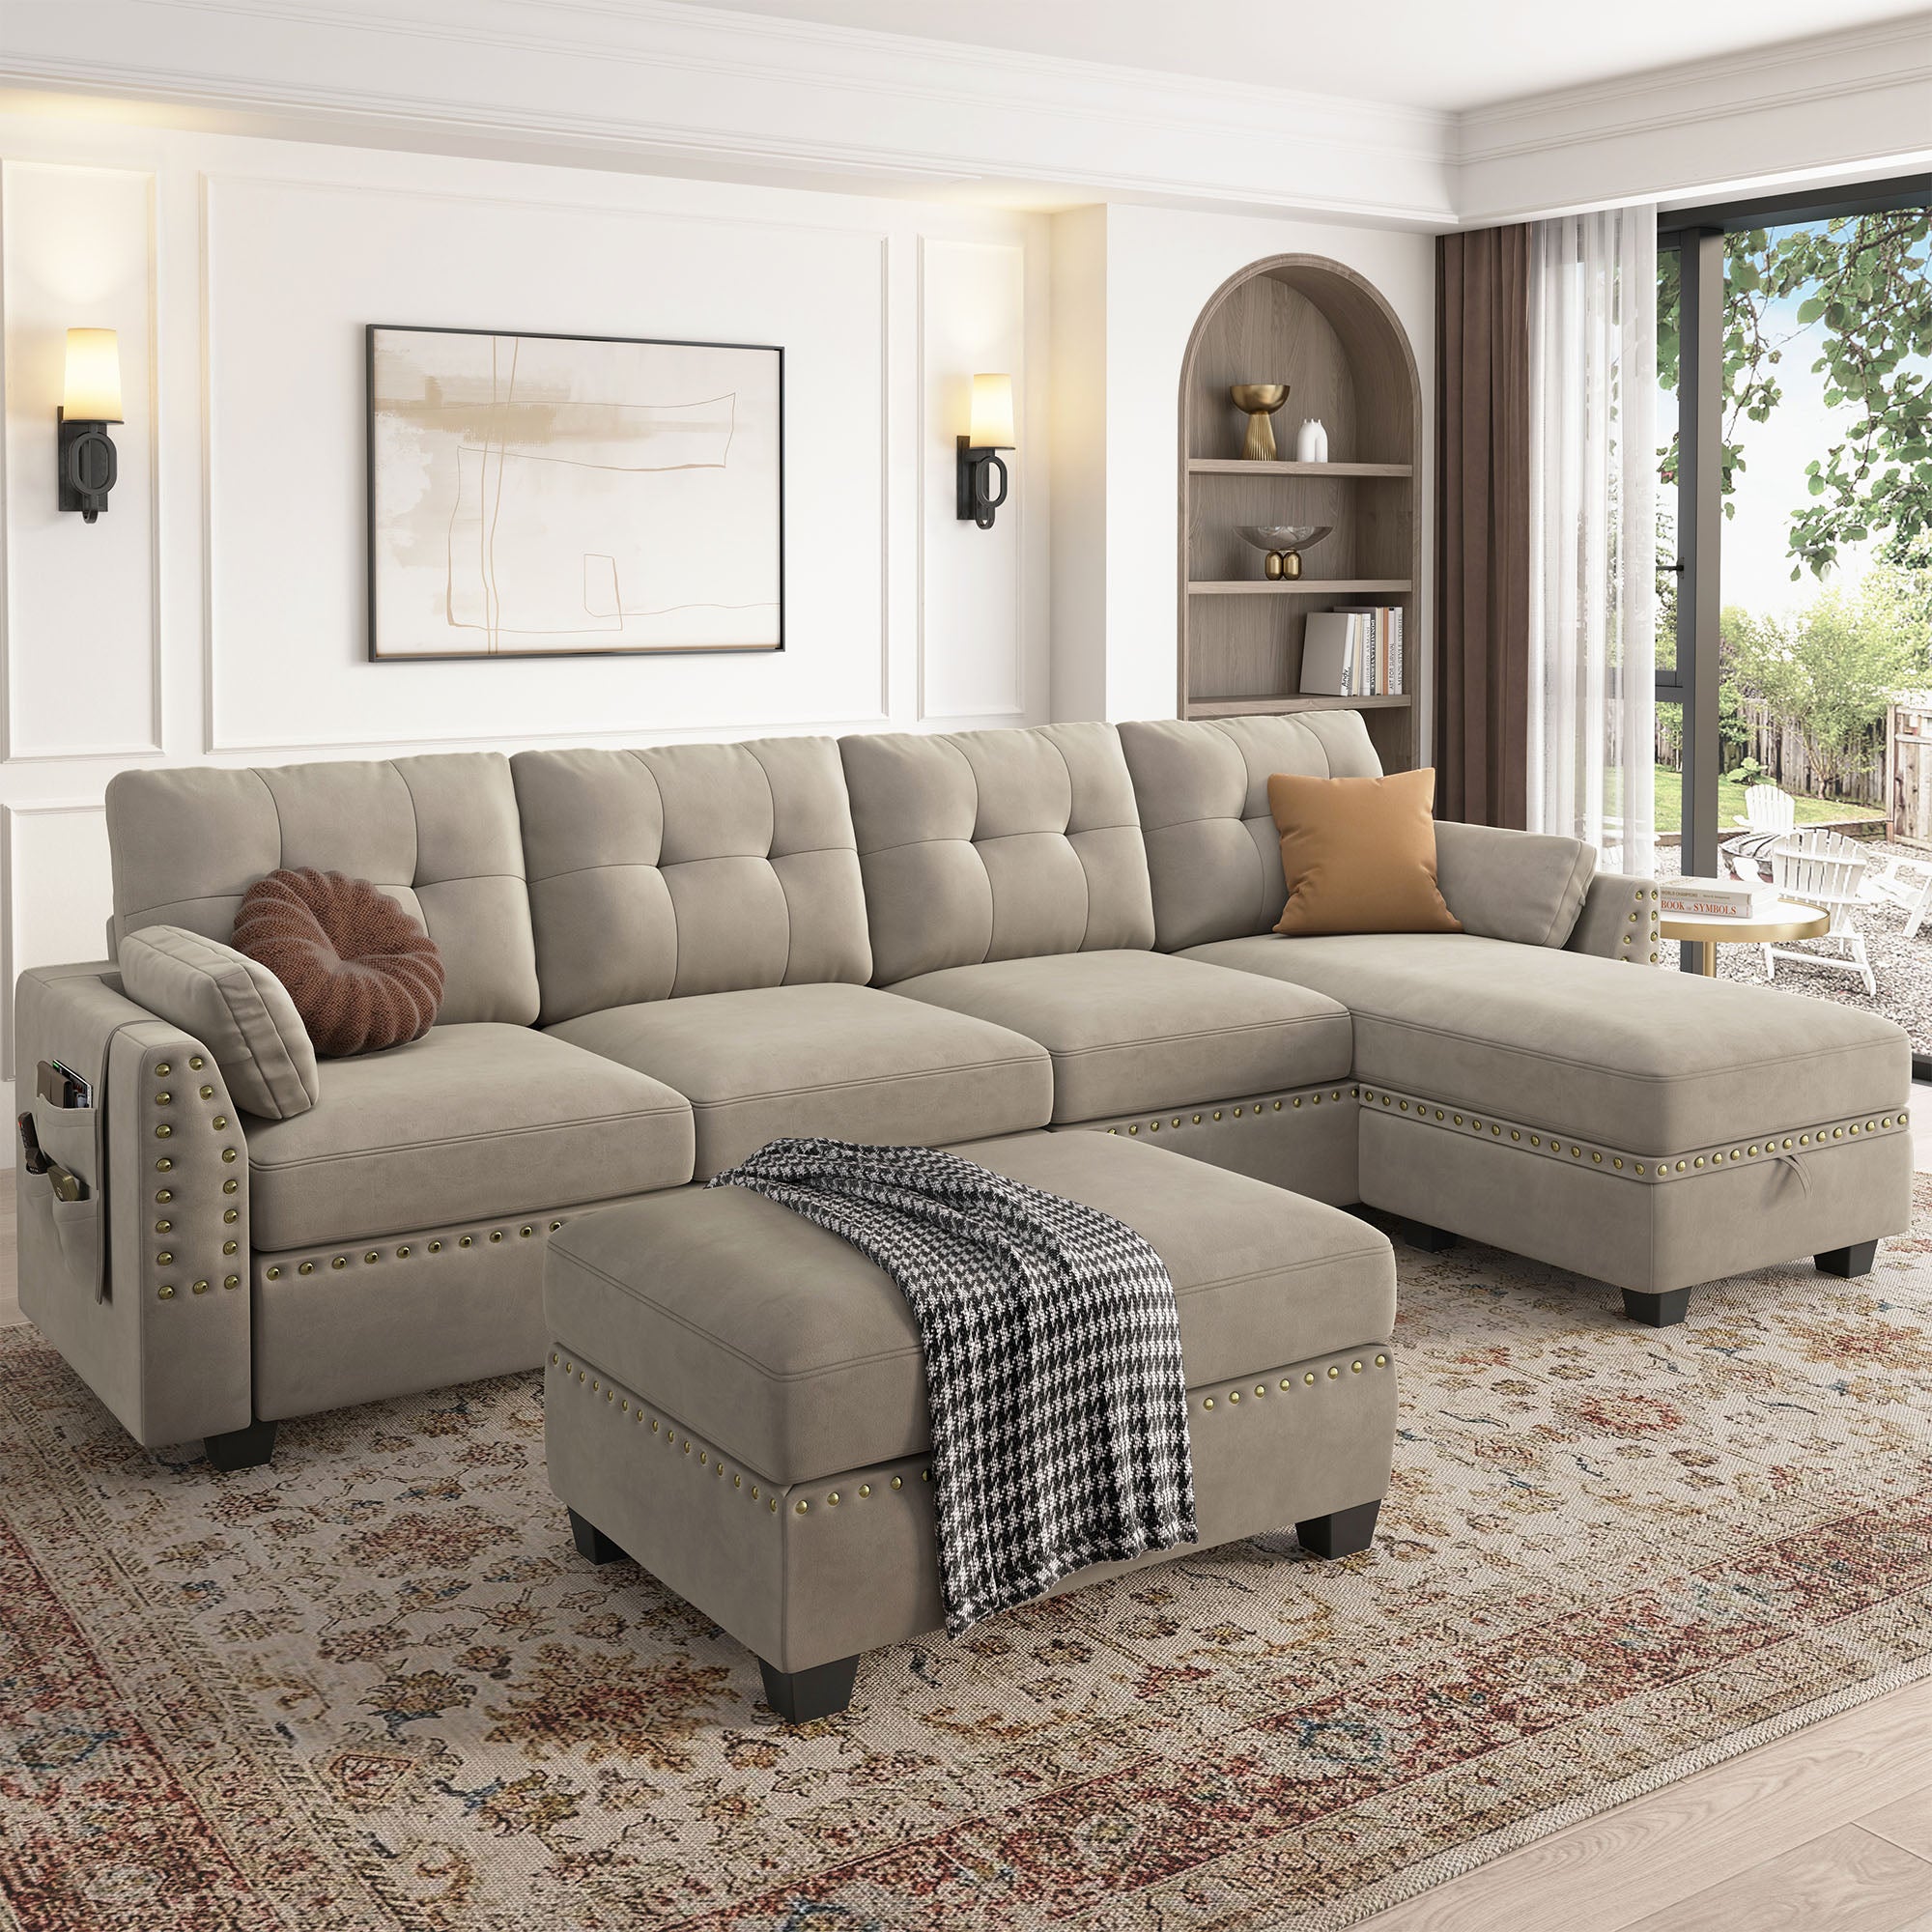 HONBAY Velvet 4-Seat L-Shaped Sectional Sofa with Storage Ottoman Set